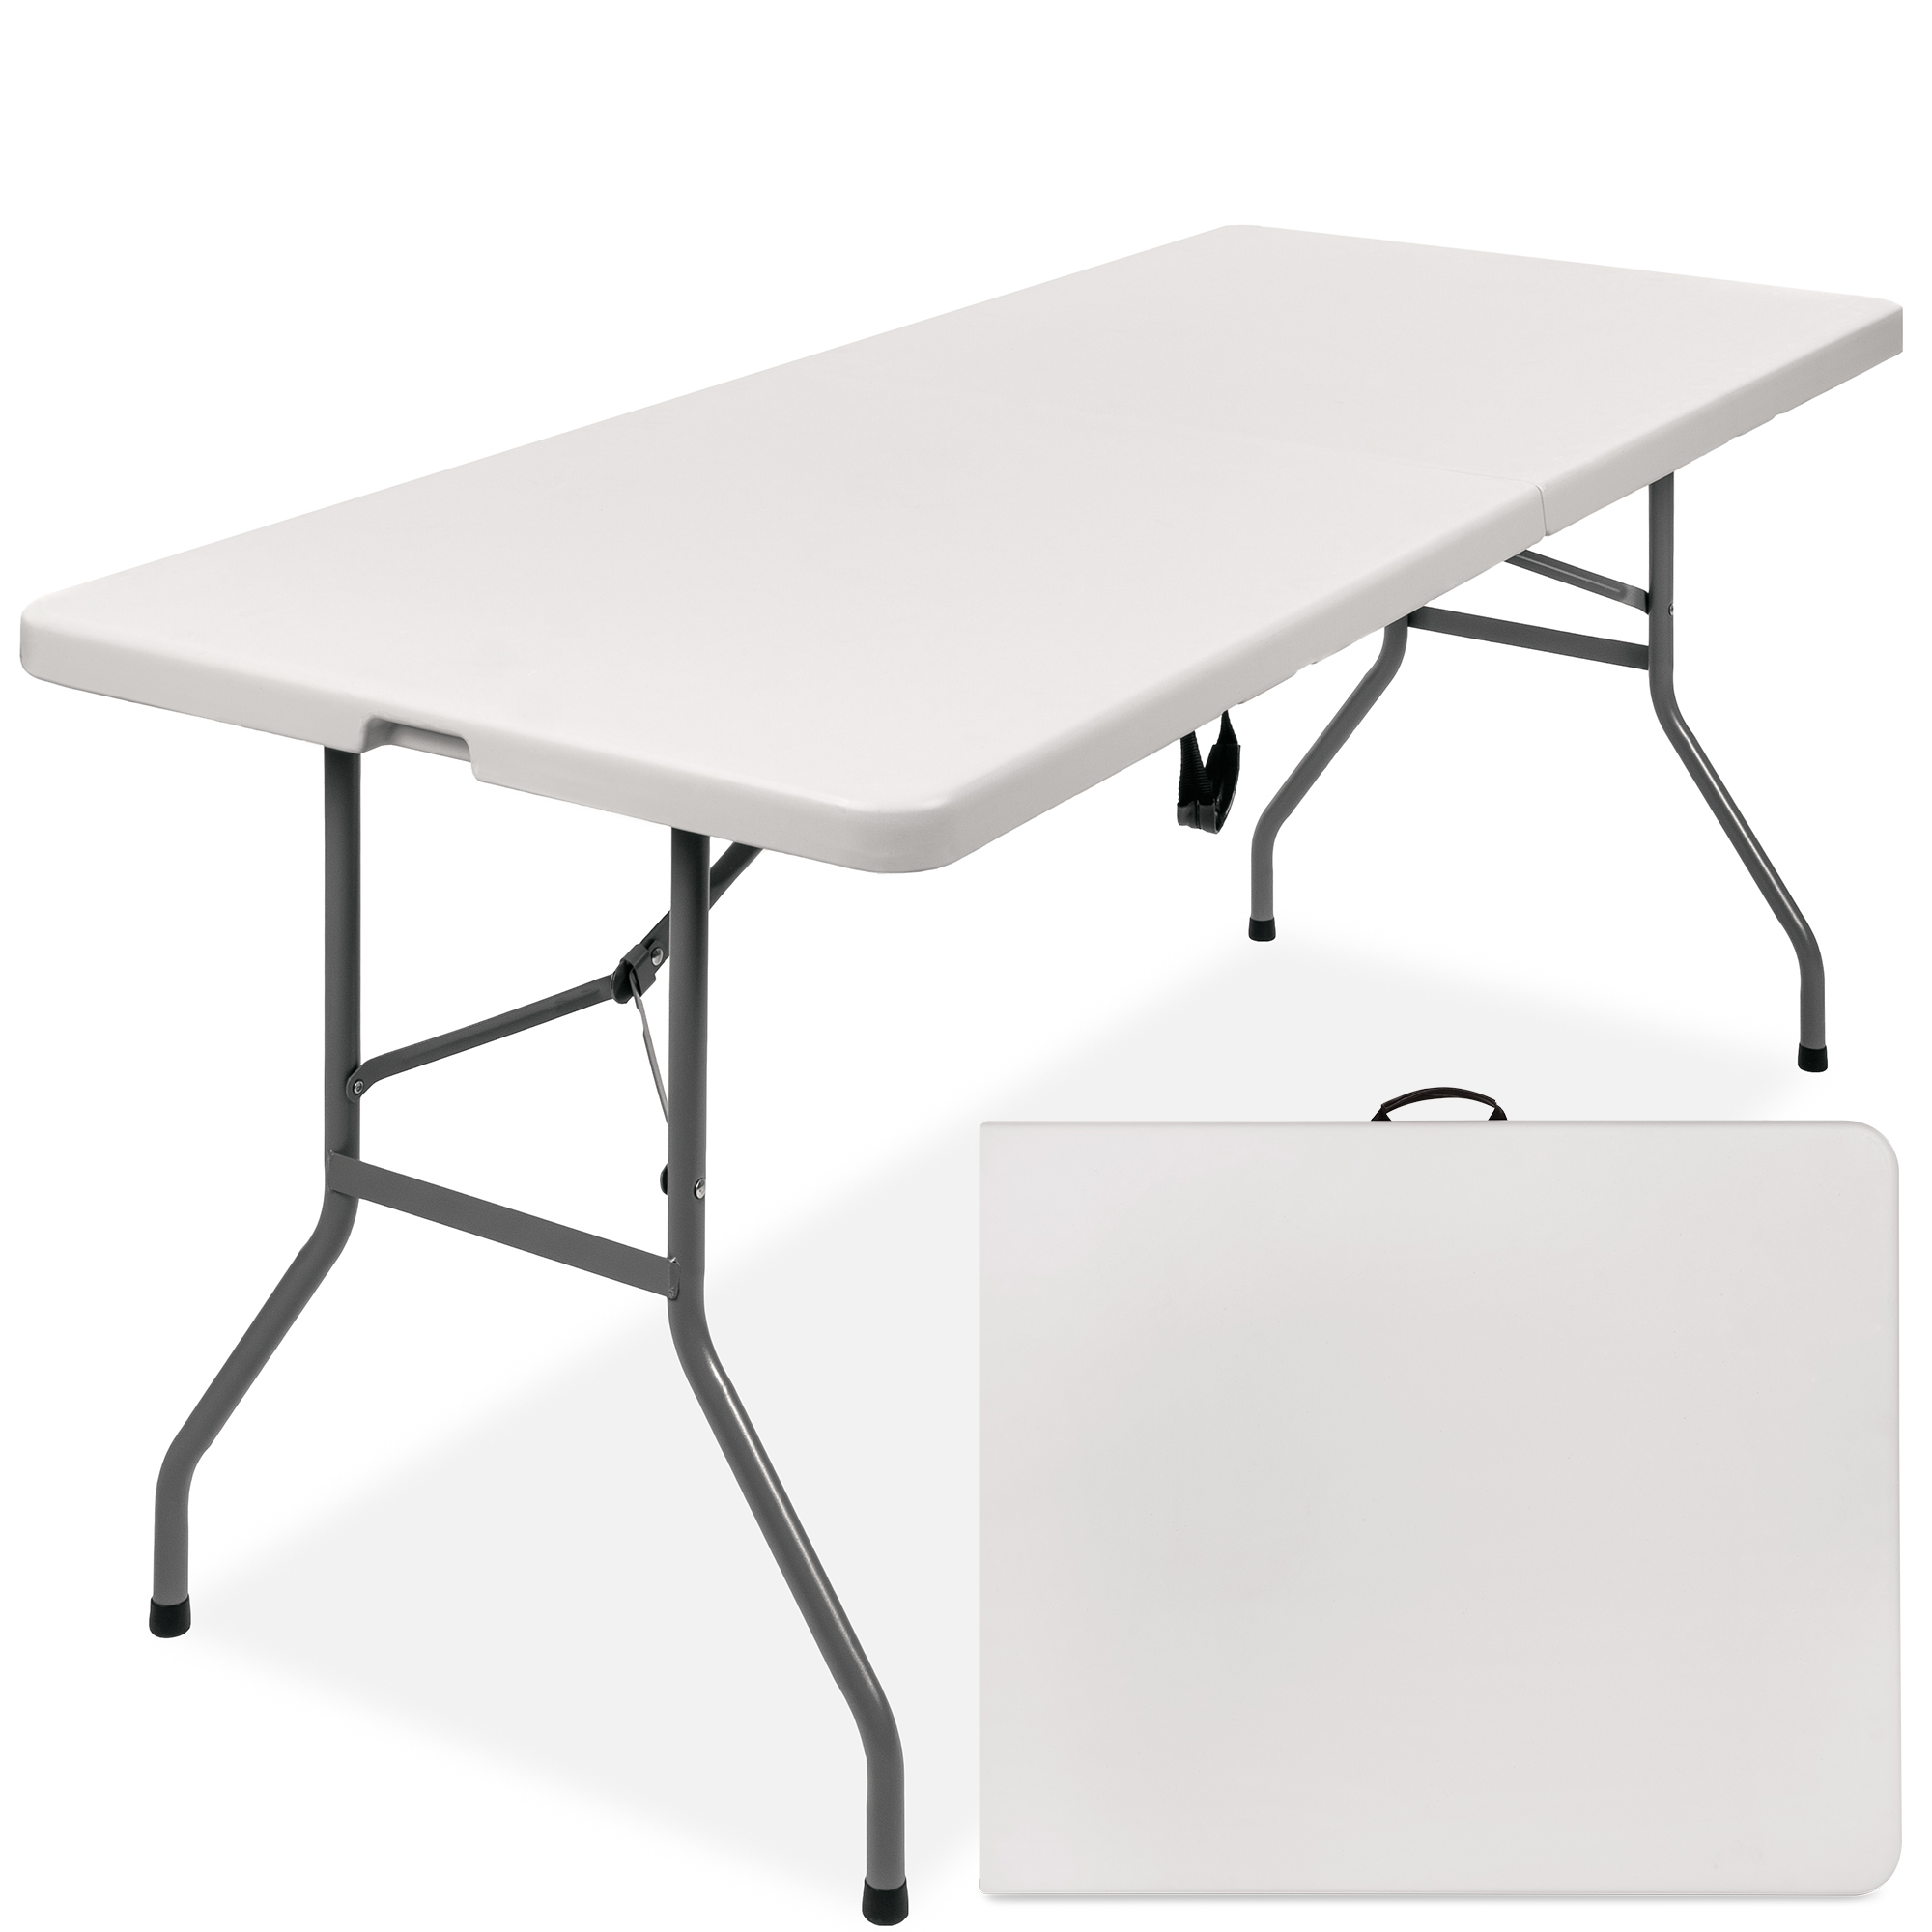 Best Choice Products 6ft Plastic Folding Table, Indoor Outdoor Heavy Duty Portable w/ Handle, Lock for Picnic - White - image 1 of 7